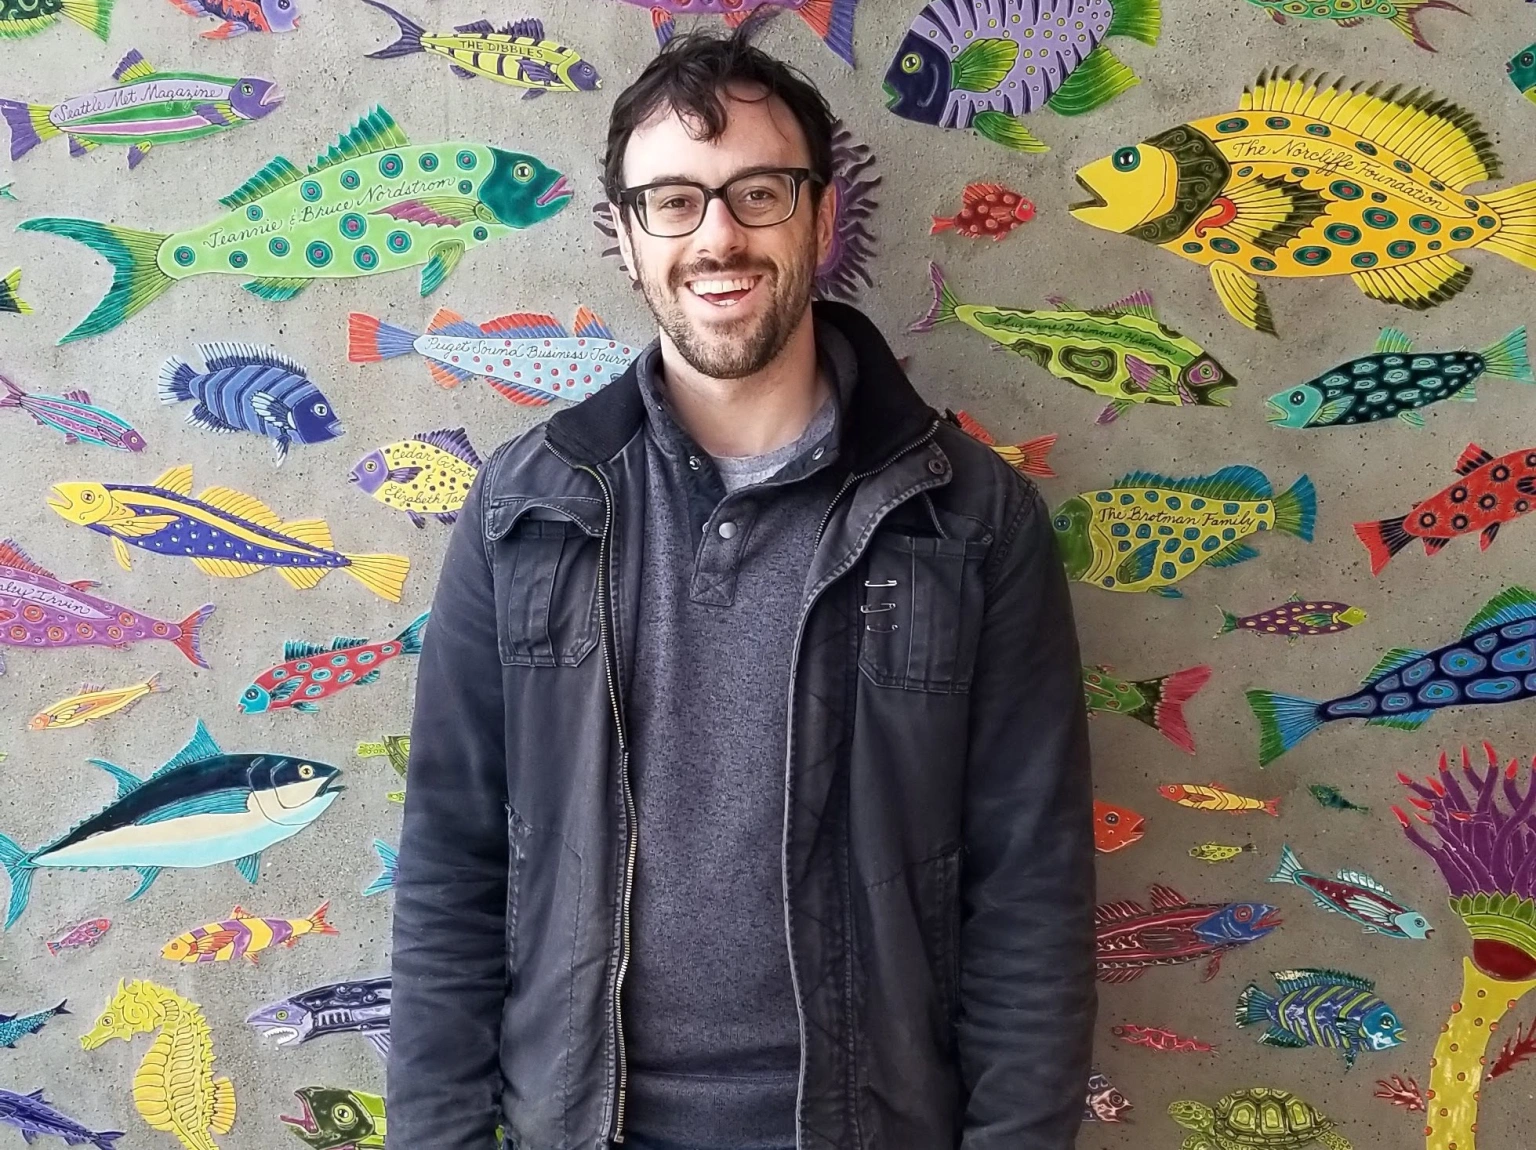 Man standing in front of color painted fish on a concrete wall. He has glasses and looks like he's mid laugh. It's very artsy vibes.